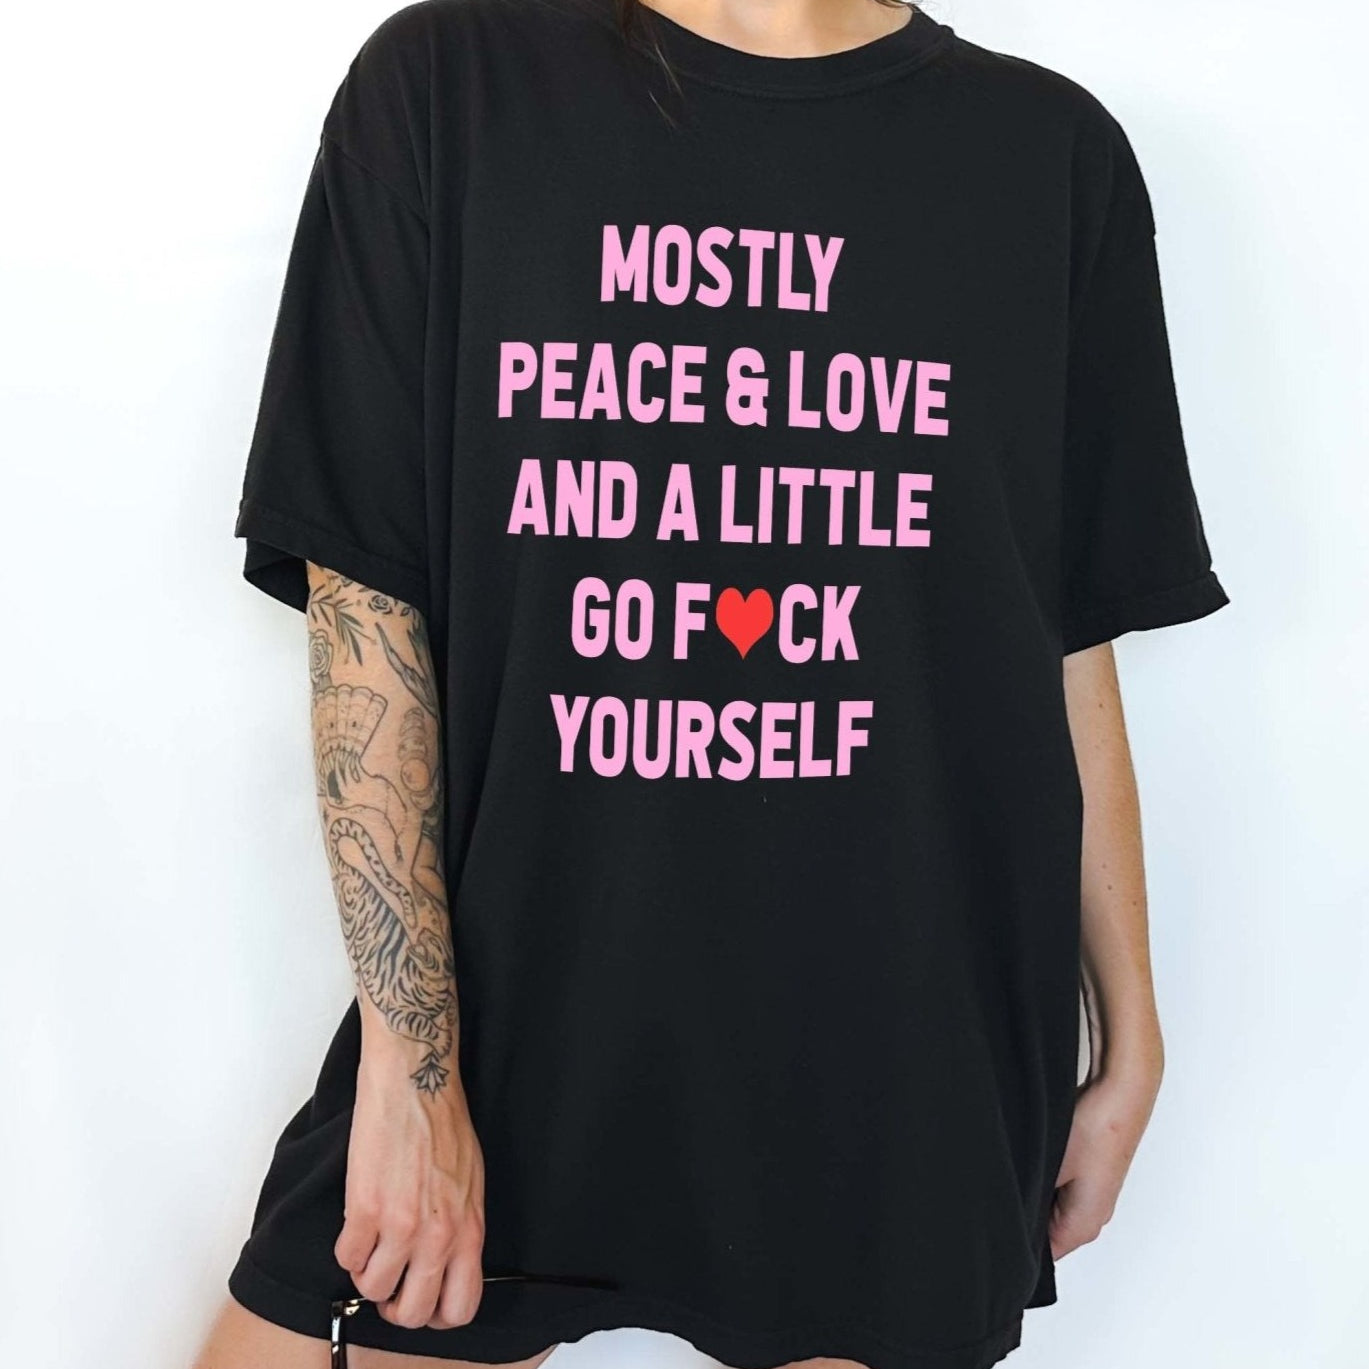 Mostly Peace & Love And A Little Go Fuck Yourself Tee - UntamedEgo LLC.